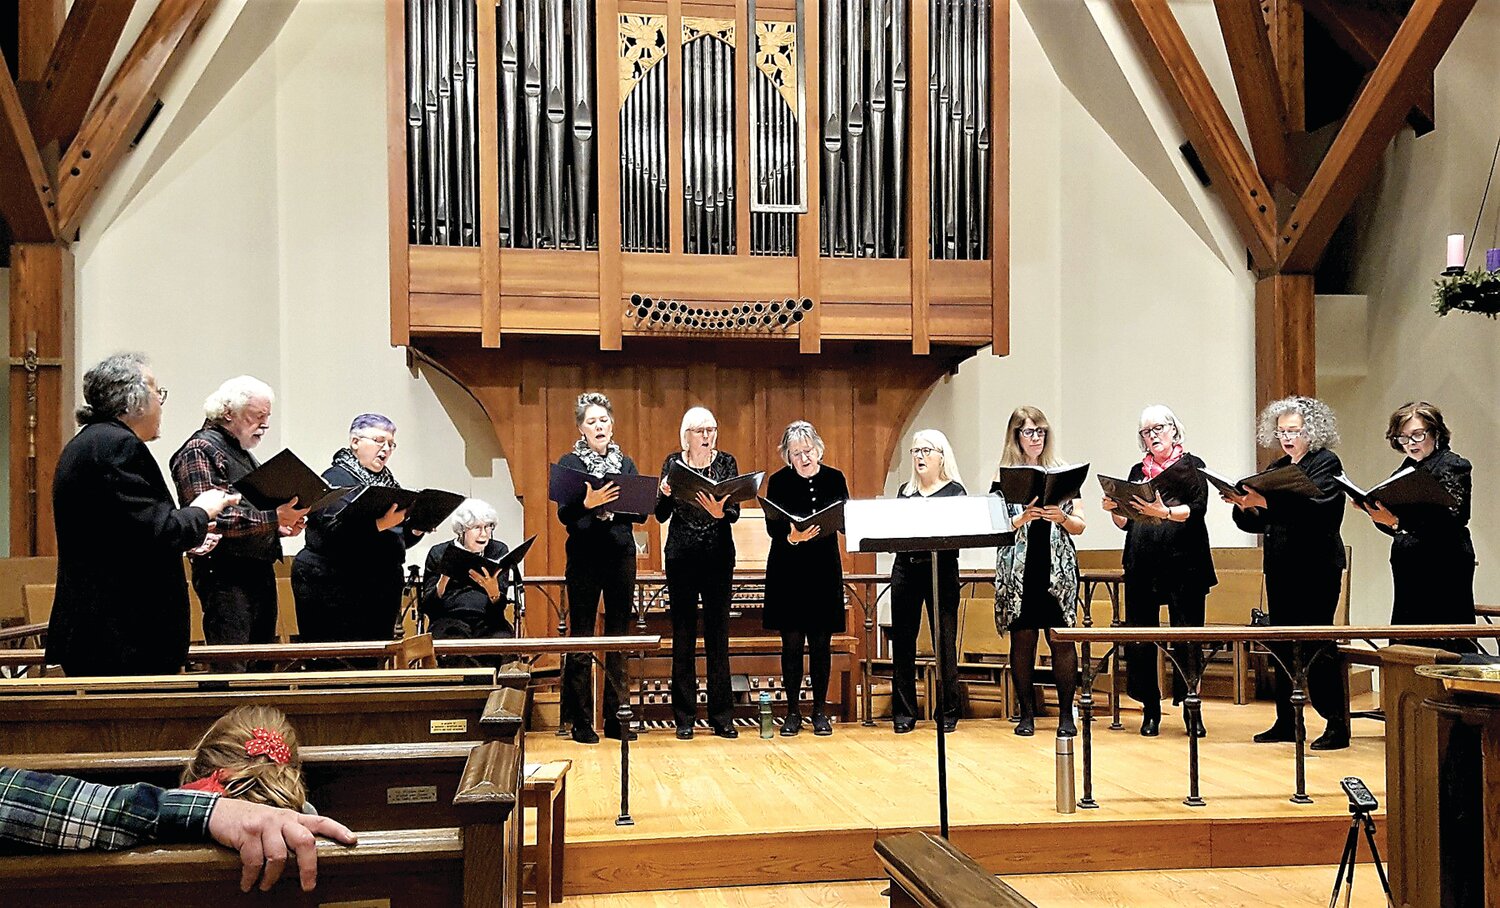 The New Hope-Solebury & Lambertville Community Choir will perform a free mini-concert Tuesday, June 4, in Solebury.